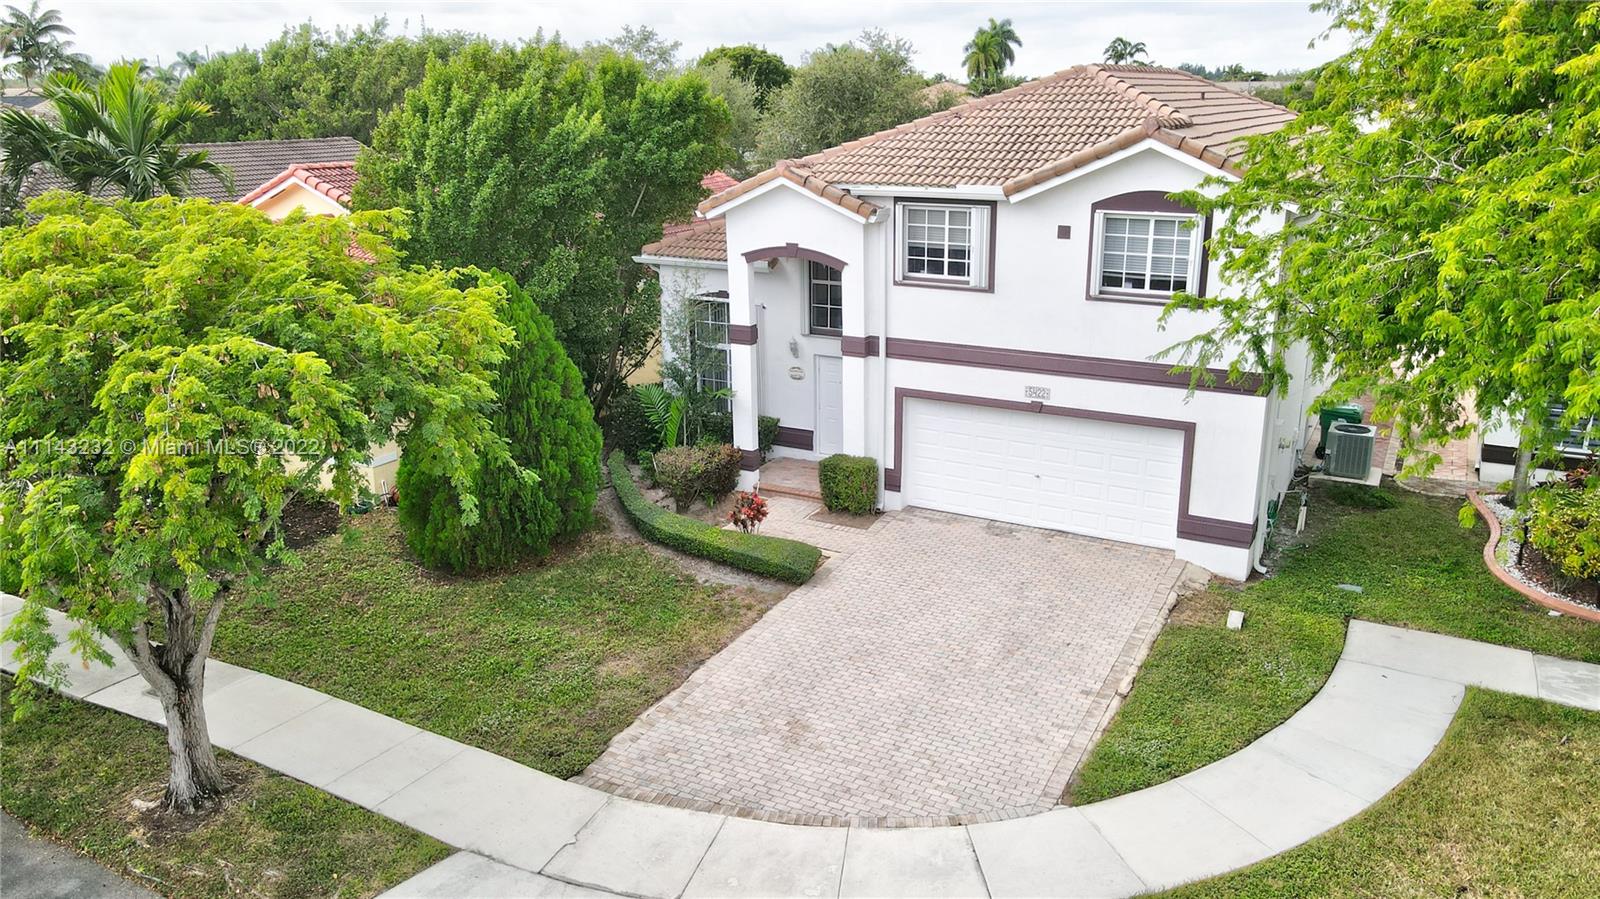 Photo 1 of 5422 110th Ave in Doral - MLS A11143232